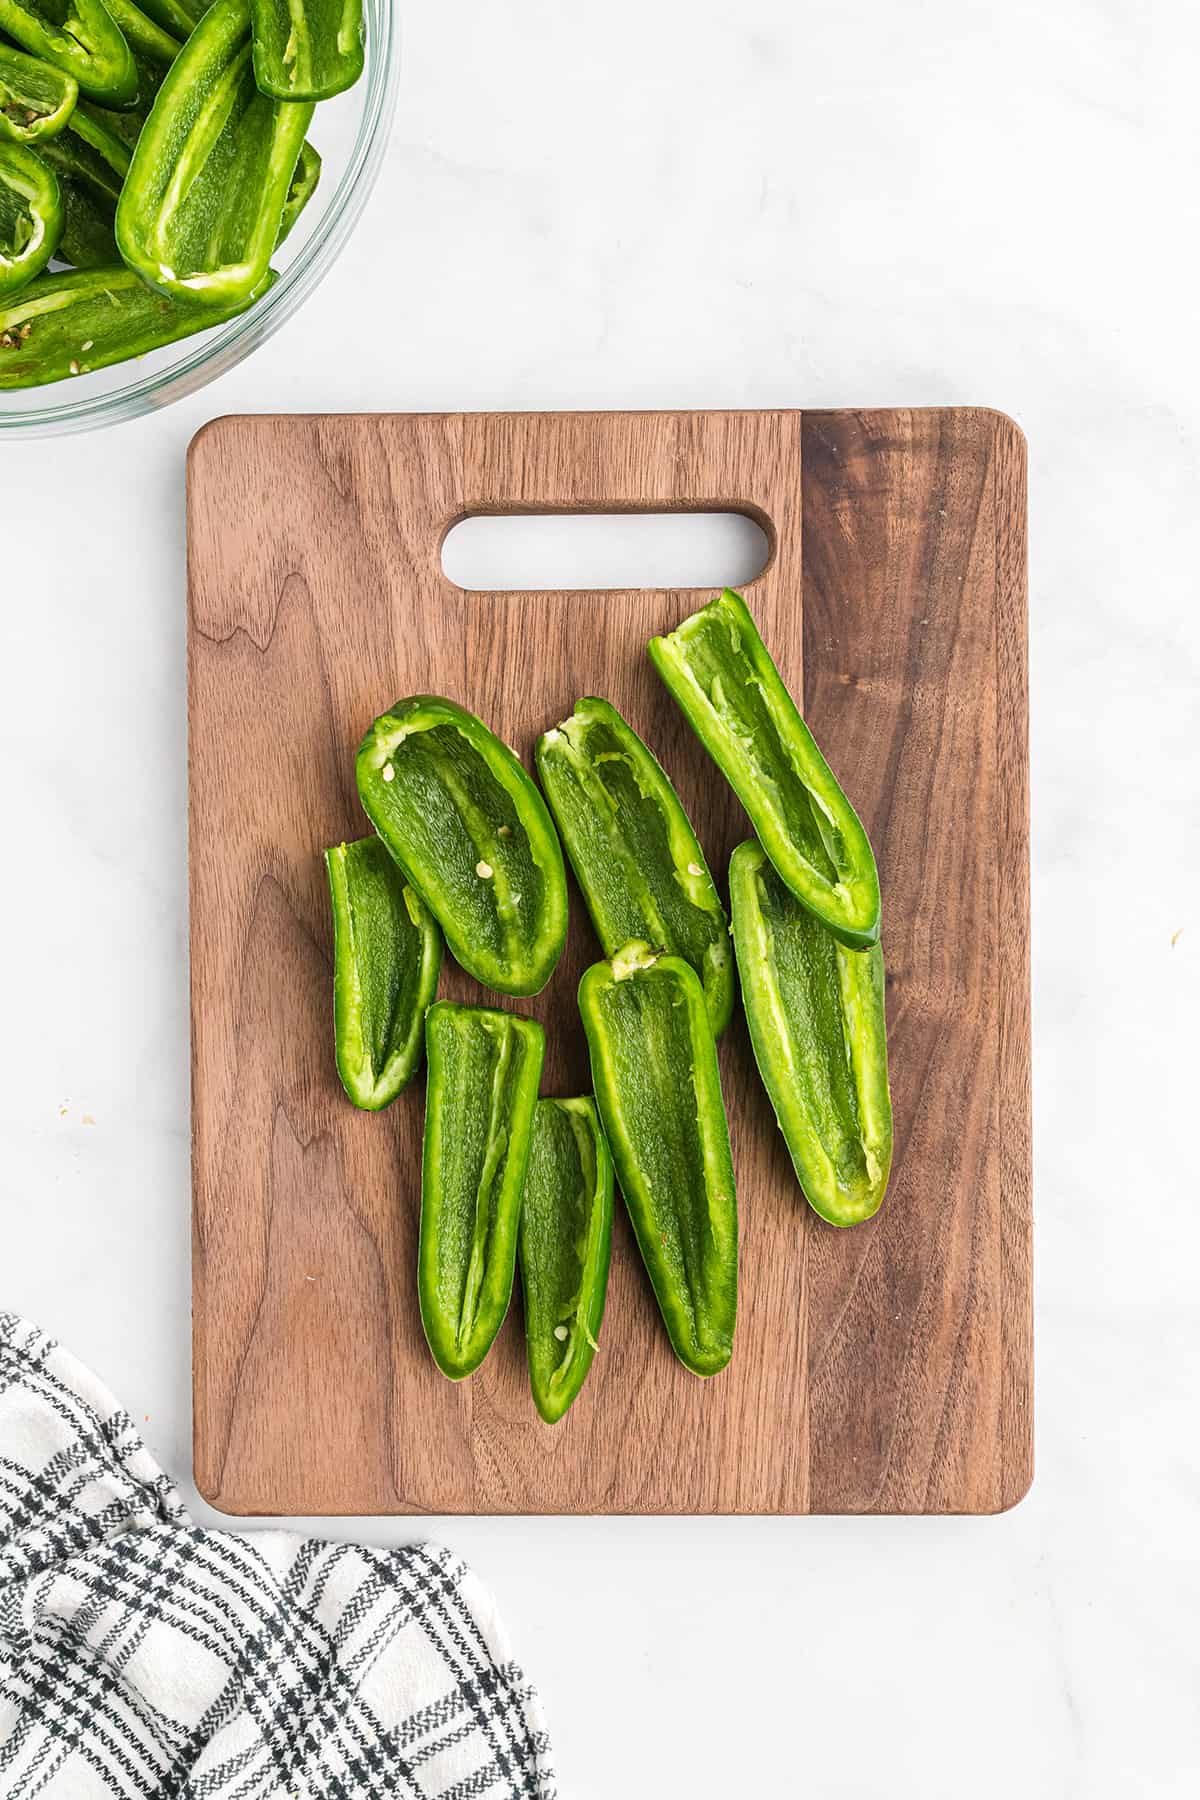 Halved jalapeno peppers on a wooden cutting board.